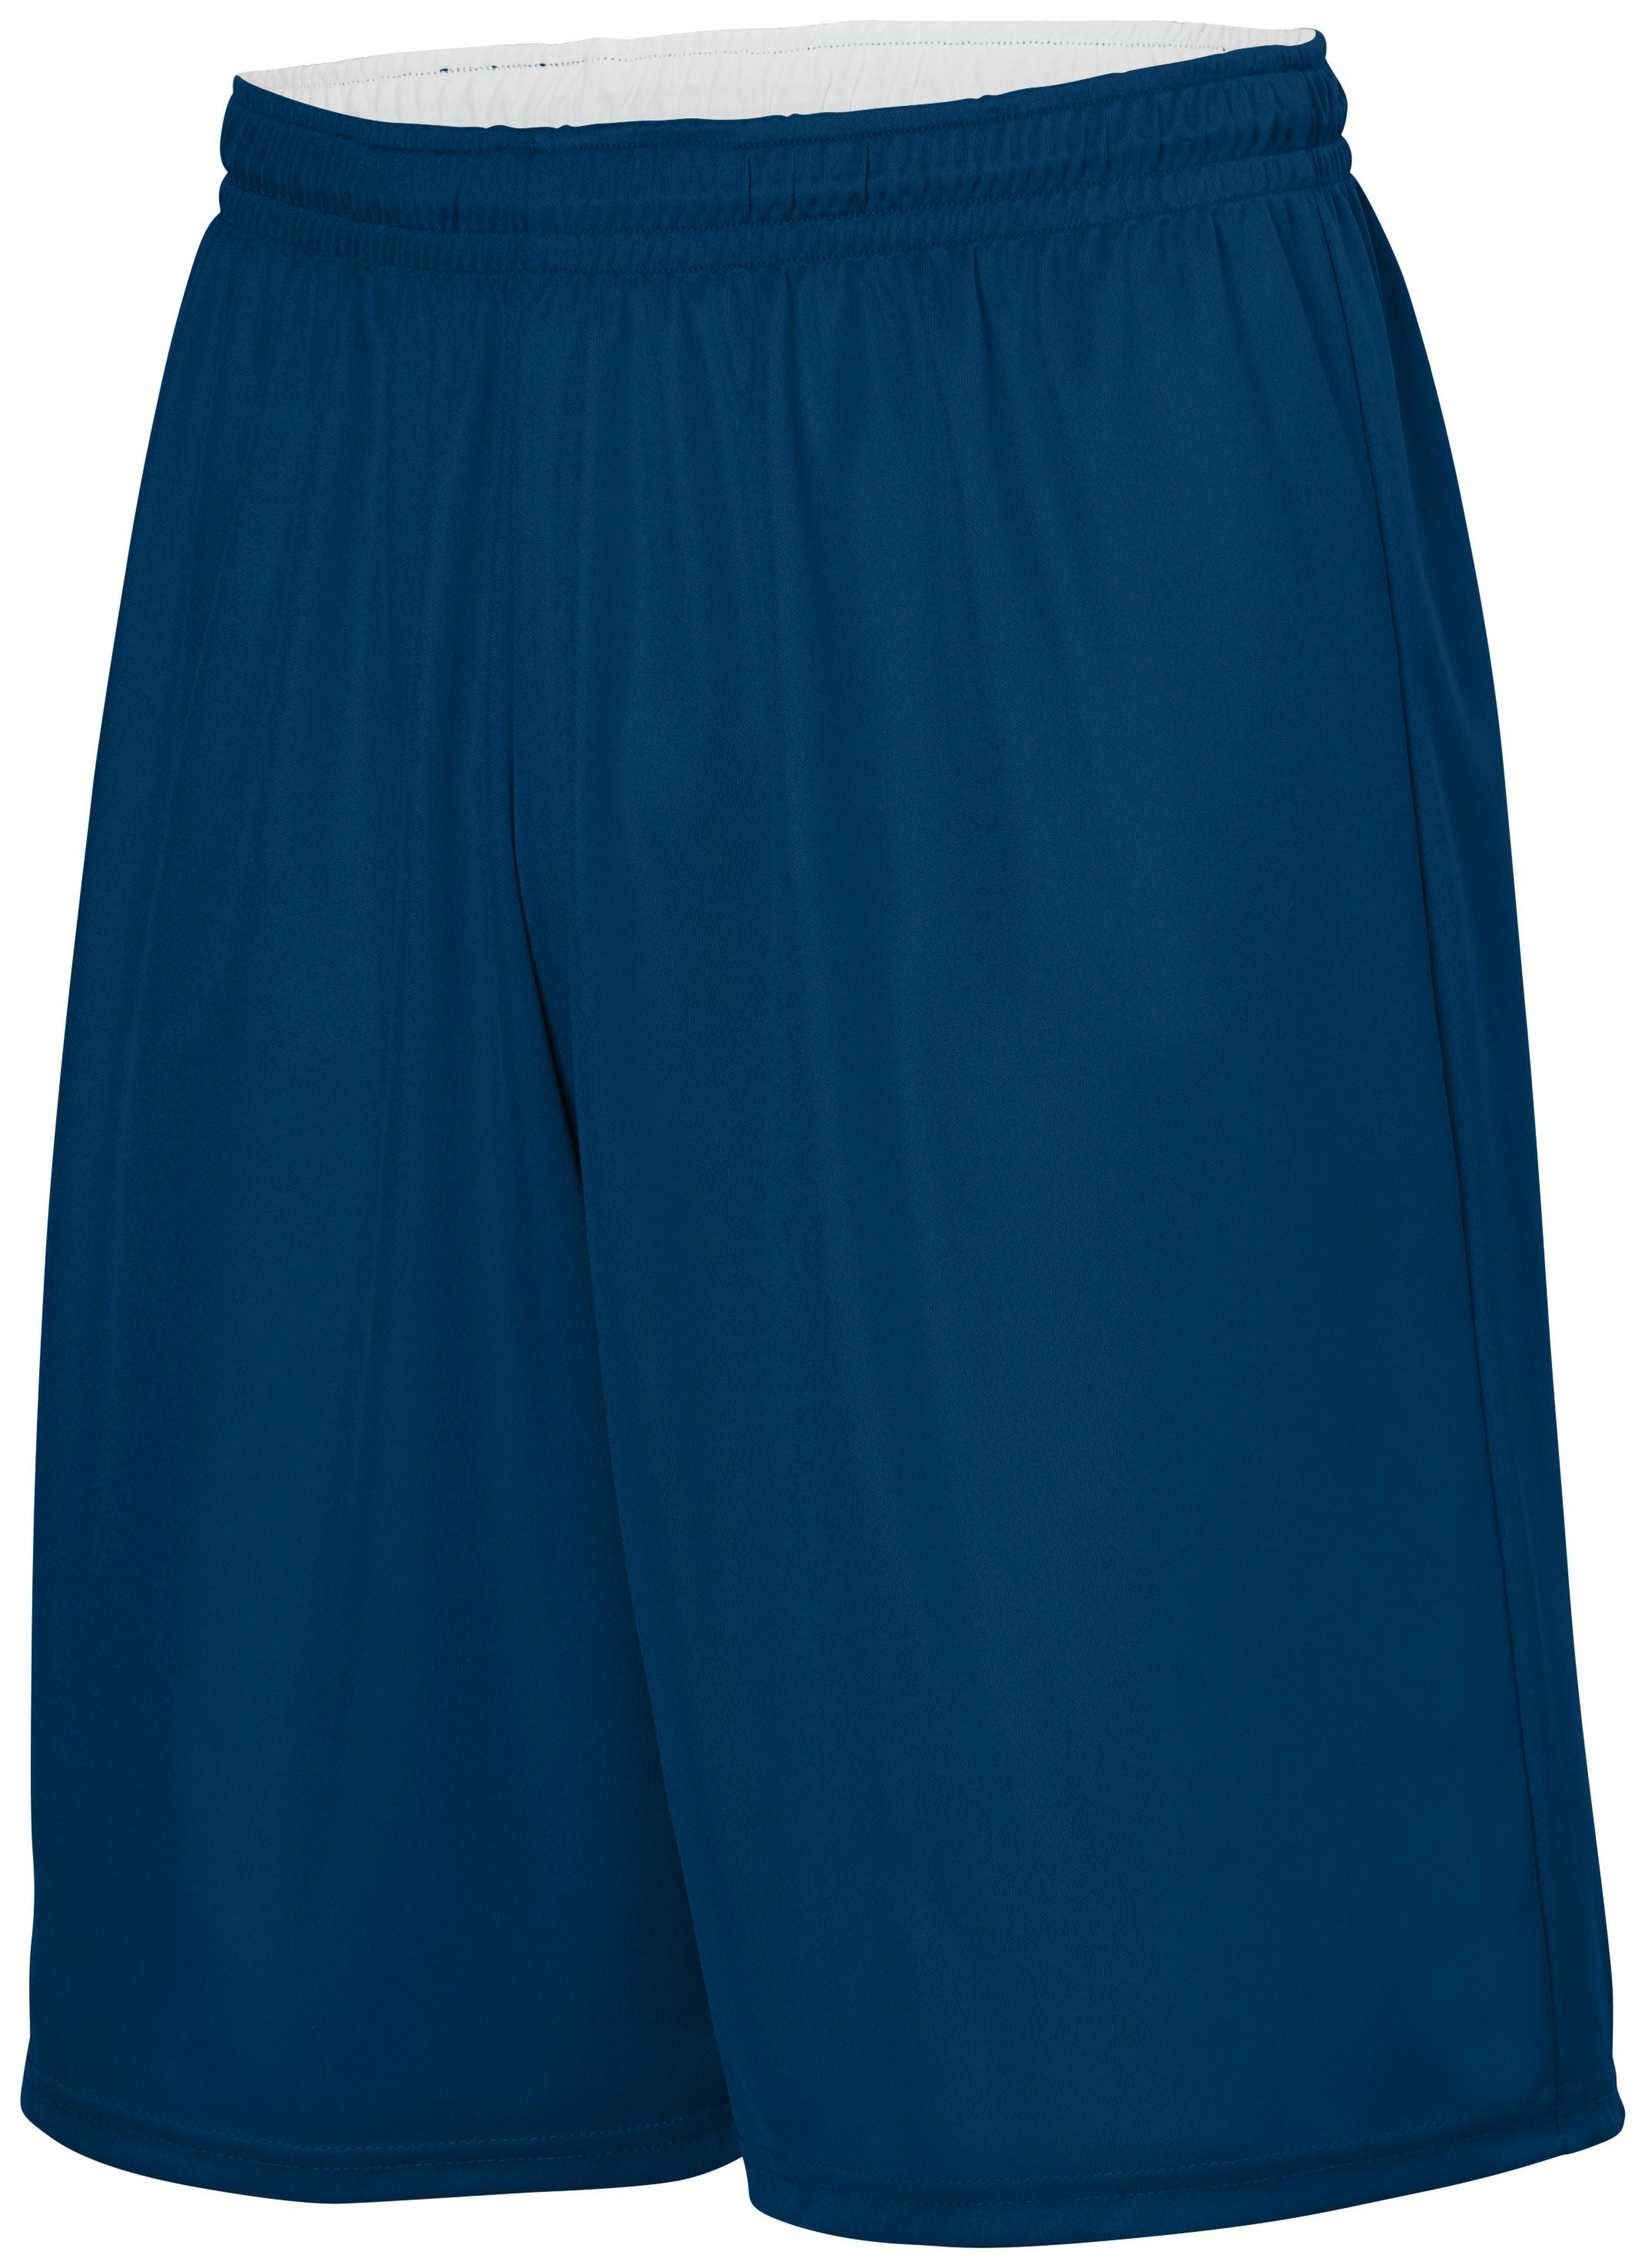 Augusta Sportswear Reversible Wicking Shorts in Navy/White  -Part of the Adult, Adult-Shorts, Augusta-Products, Basketball, All-Sports, All-Sports-1 product lines at KanaleyCreations.com